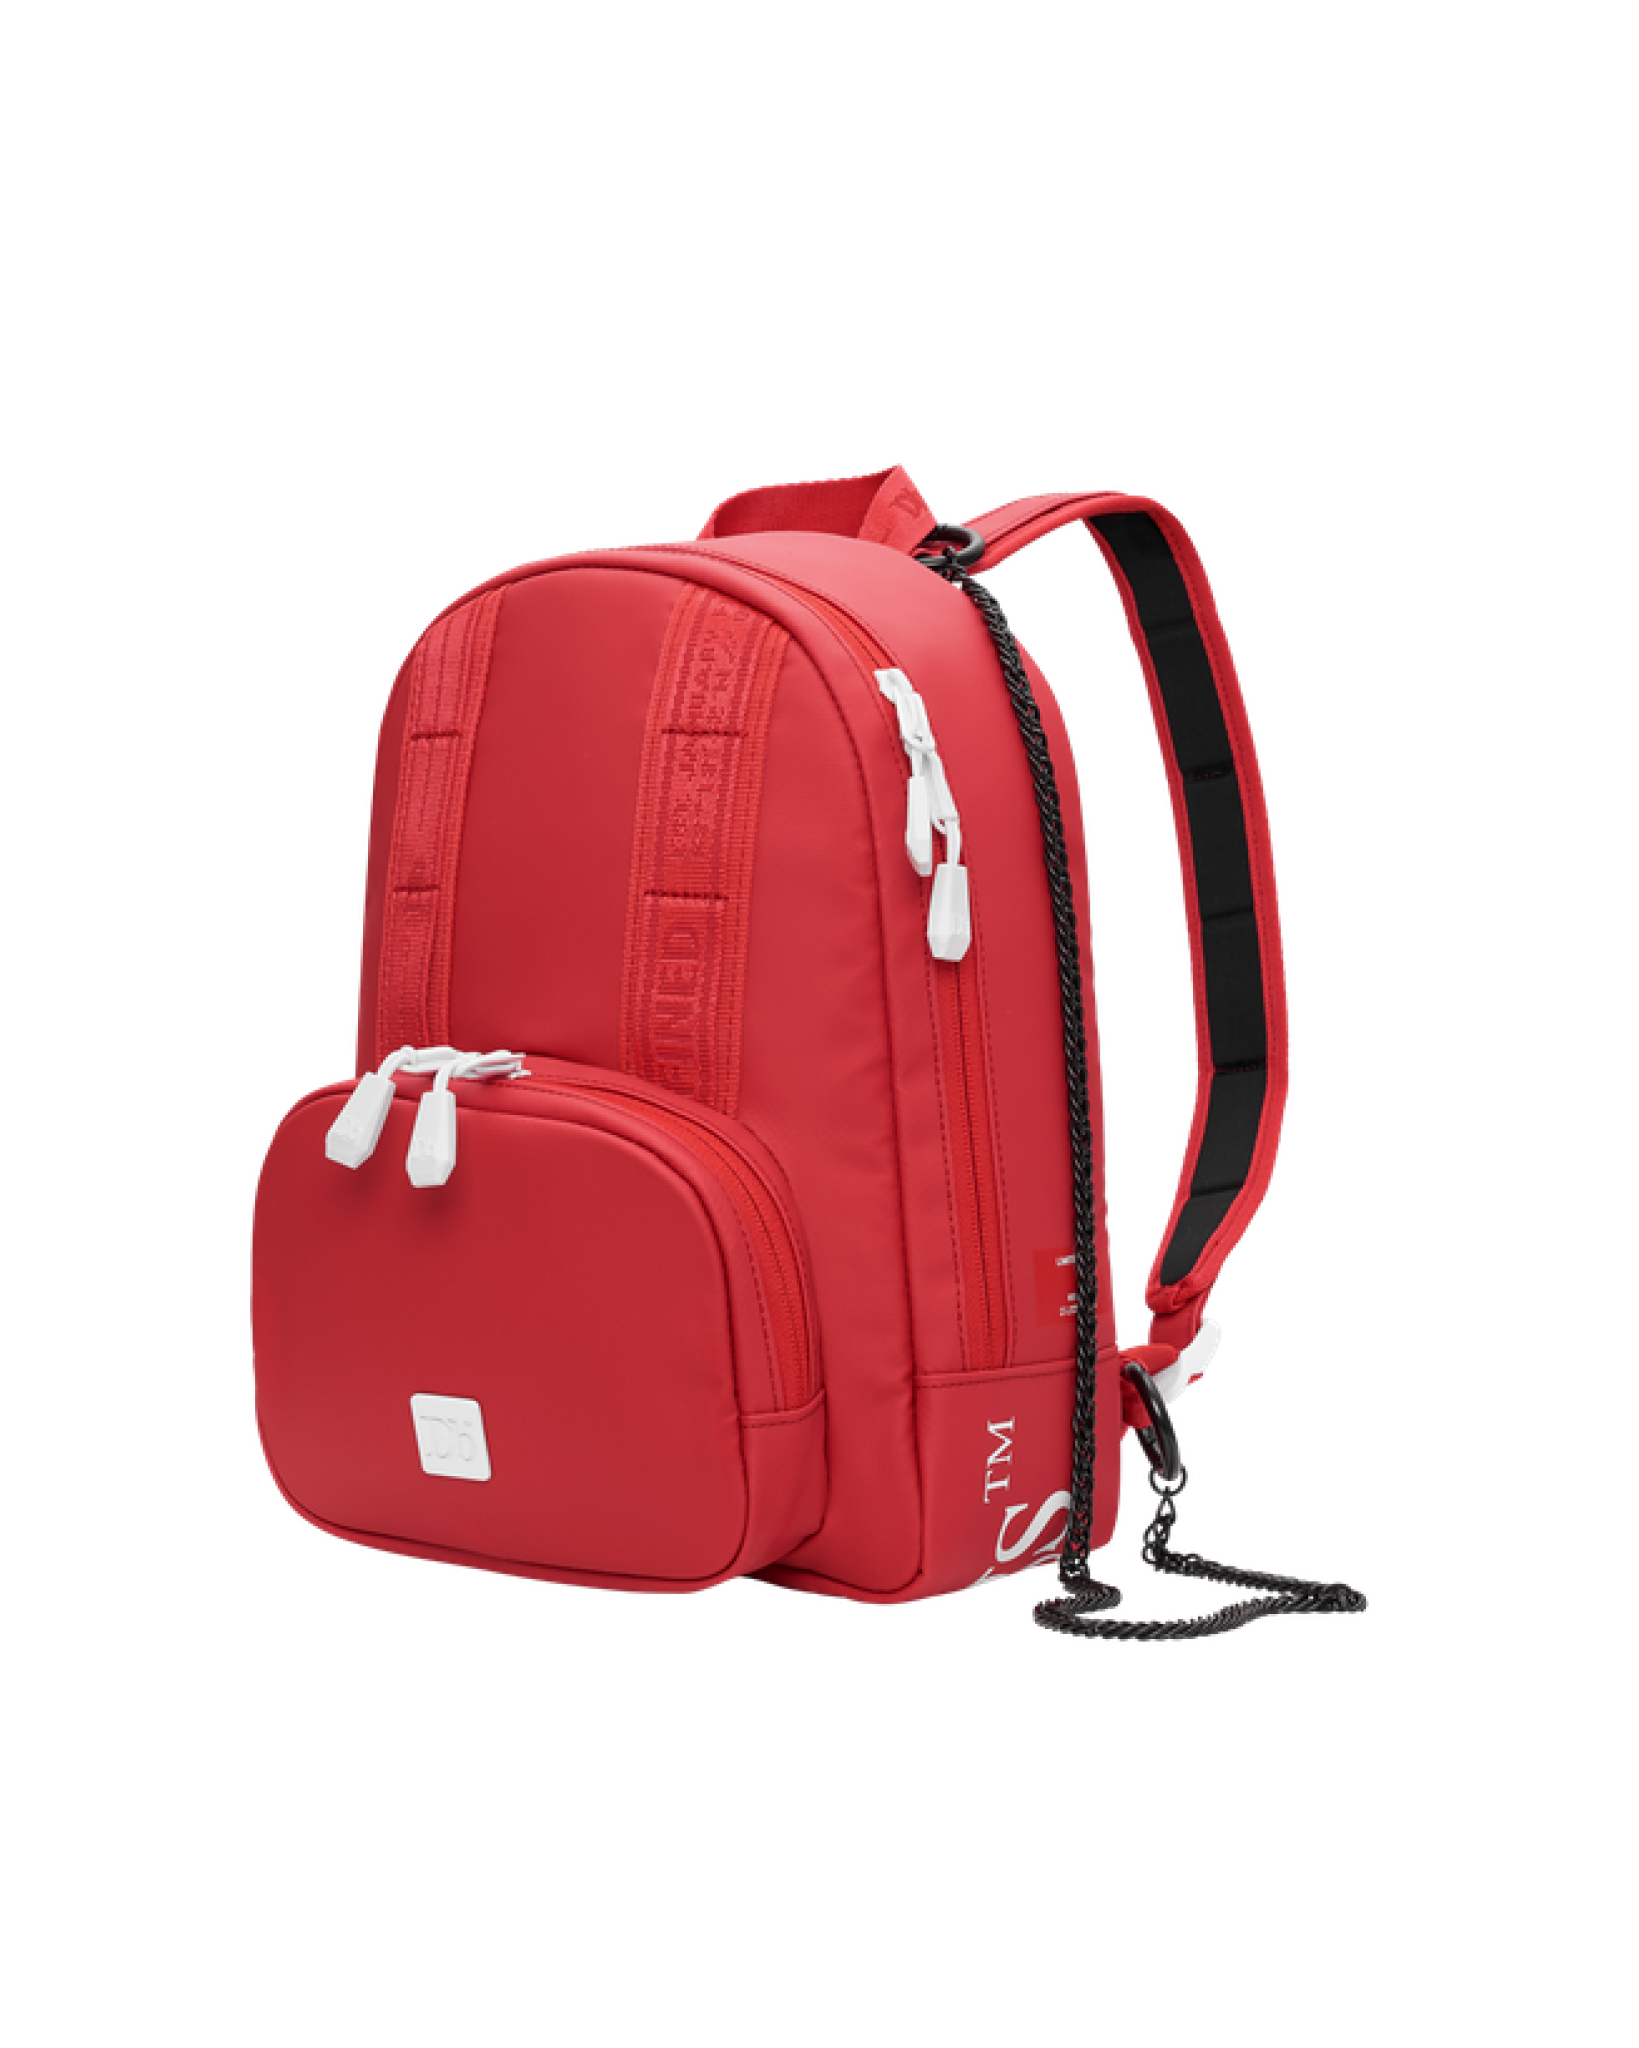 Petite Backpack 8L Scarlet Red White - Scarlet Red White